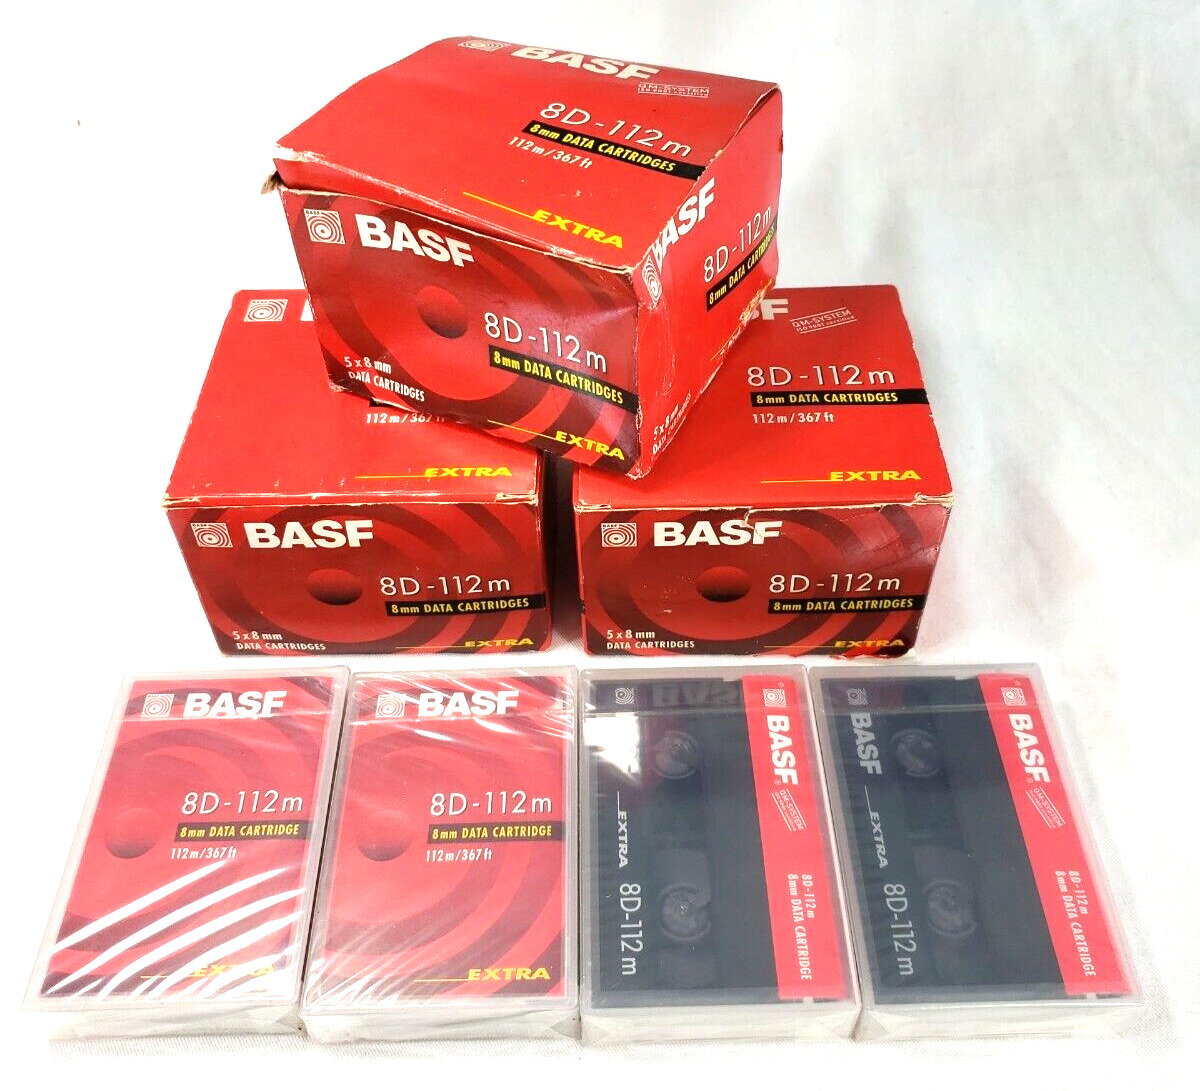 BASF 14 Extra 8D-112m Data Cartridges - NEW, Sealed, in Plastic Cases IOB       